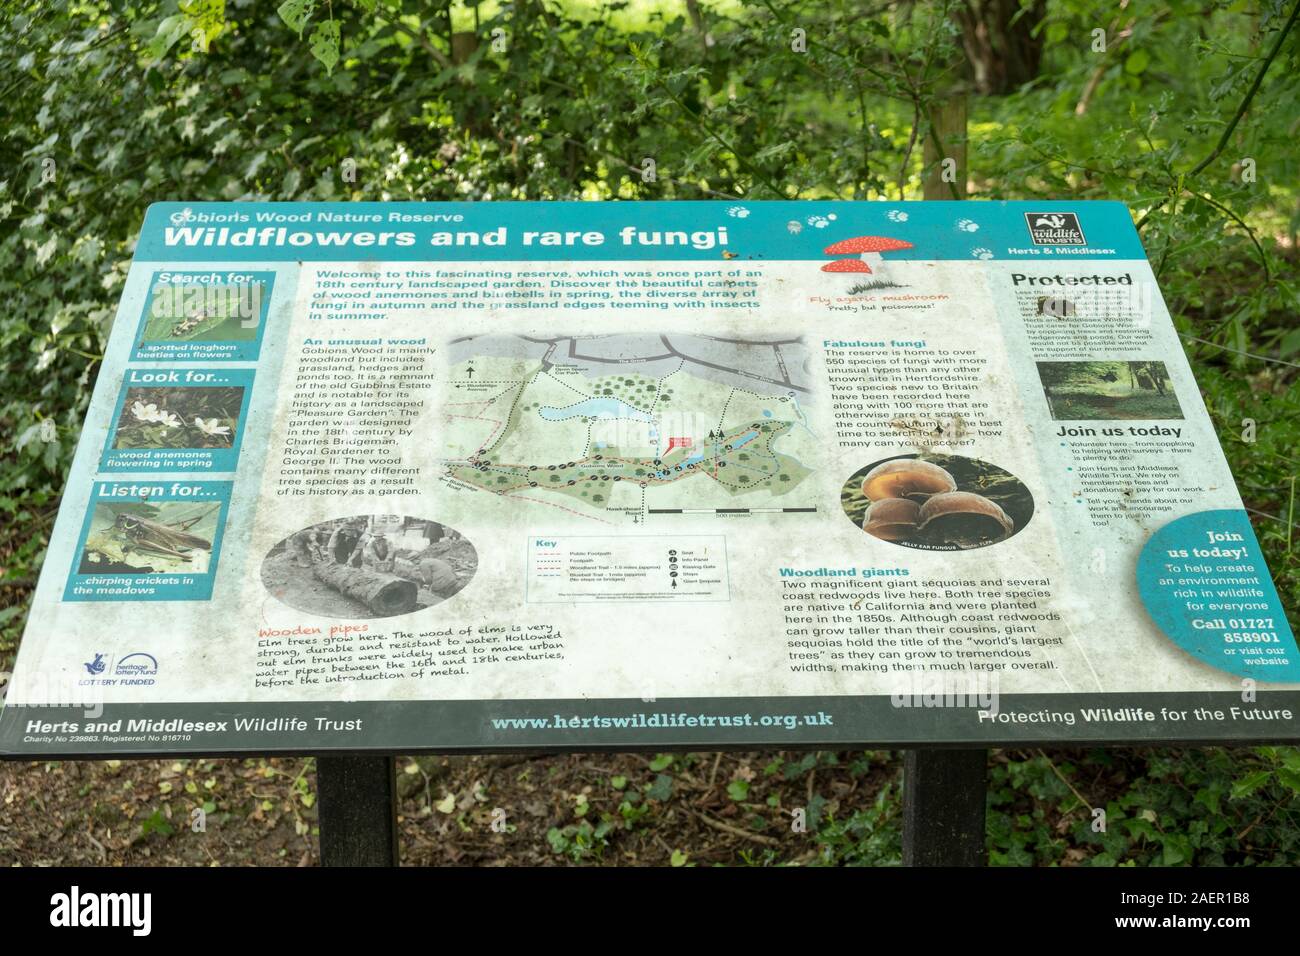 Wildflowers and rare fungi wildlife trust noticeboard in Gobions wood. Stock Photo